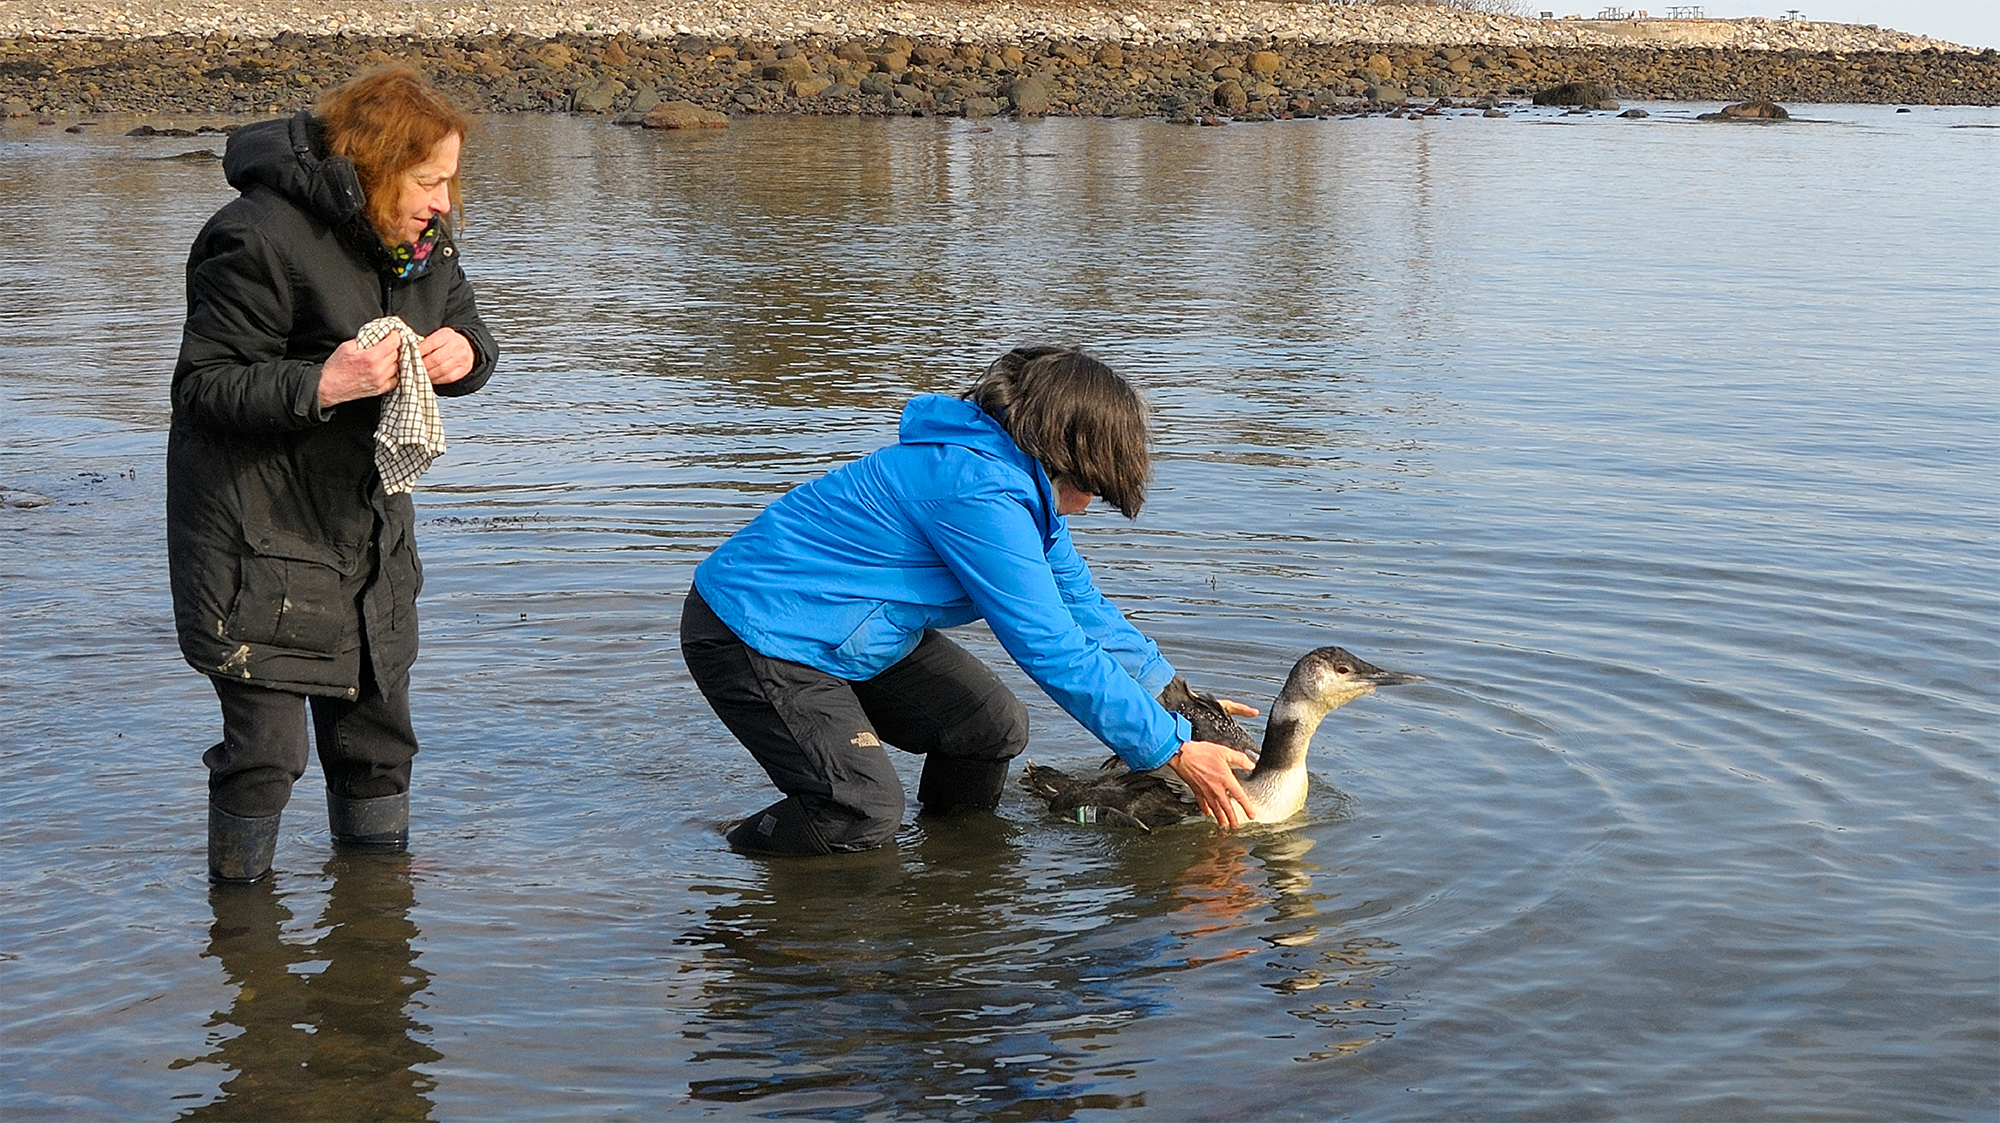 Releasing saved loons